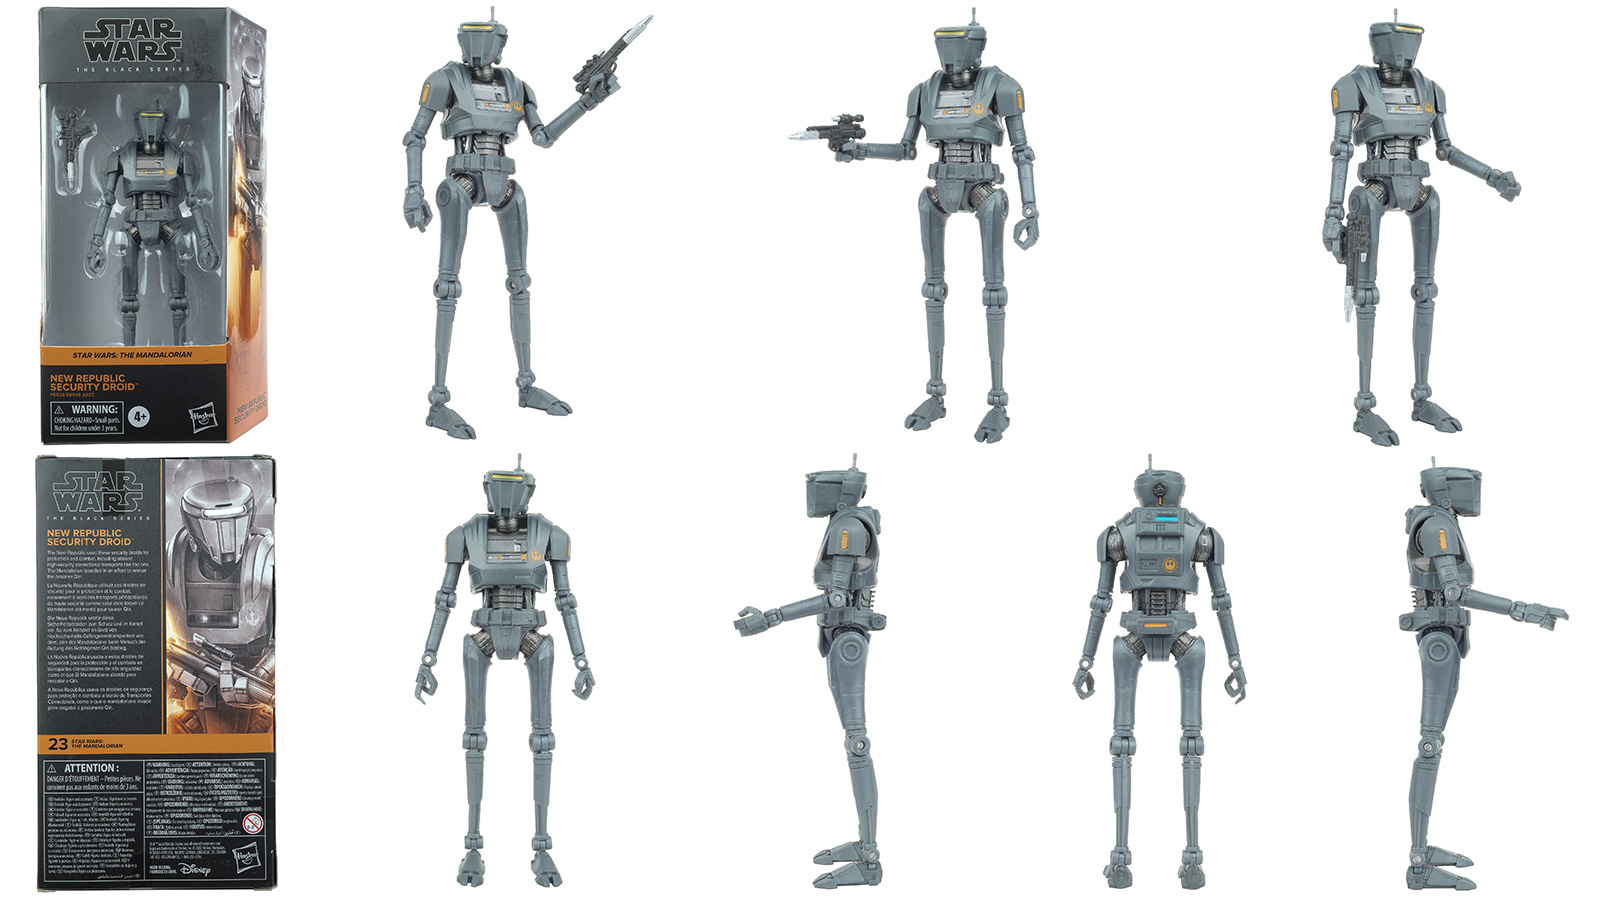 New Photos - The Black Series 6-Inch 23: New Republic Security Droid